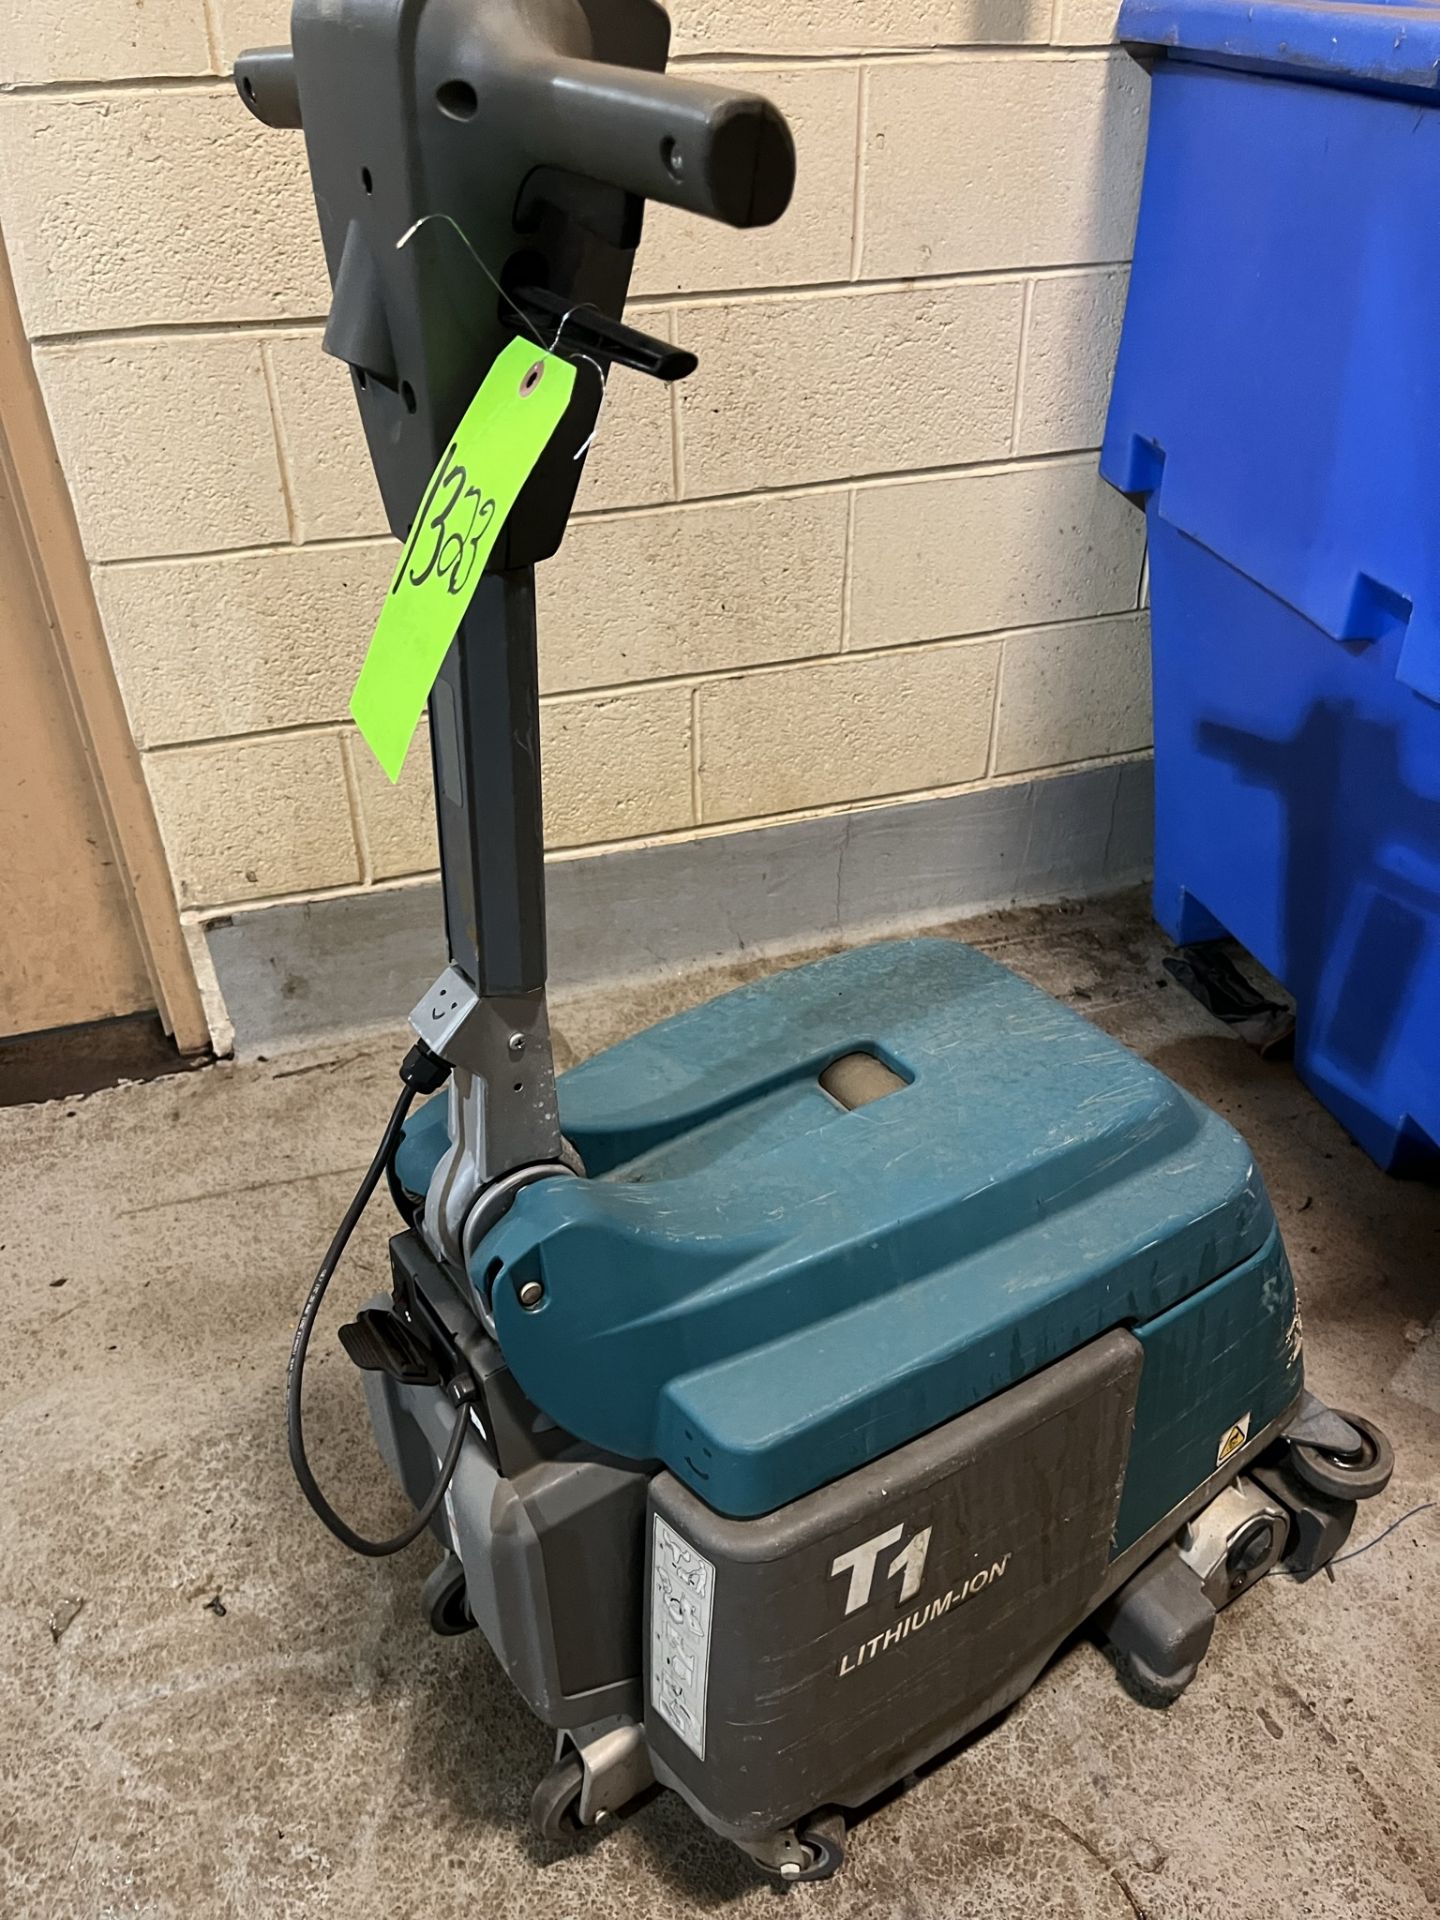 TENNANT T1 CORDED WALK BEHIND FLOOR SCRUBBER (Located Freehold, NJ) (Simple Loading Fee $137.50) - Image 3 of 6